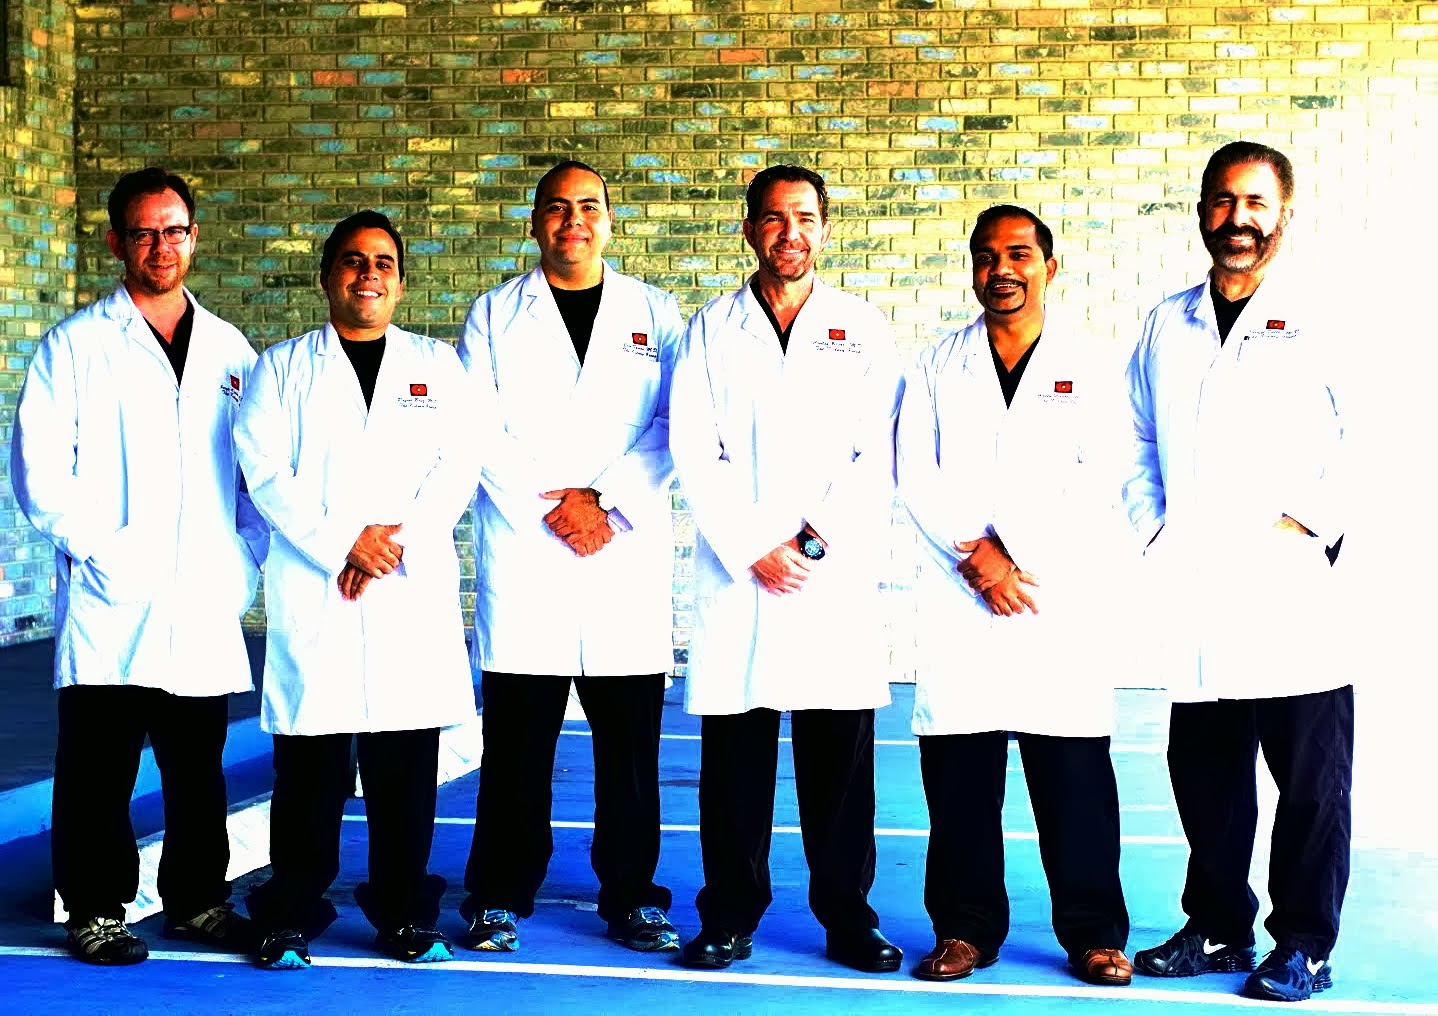 THE DOCTORS OF THE KIDNEY GROUP